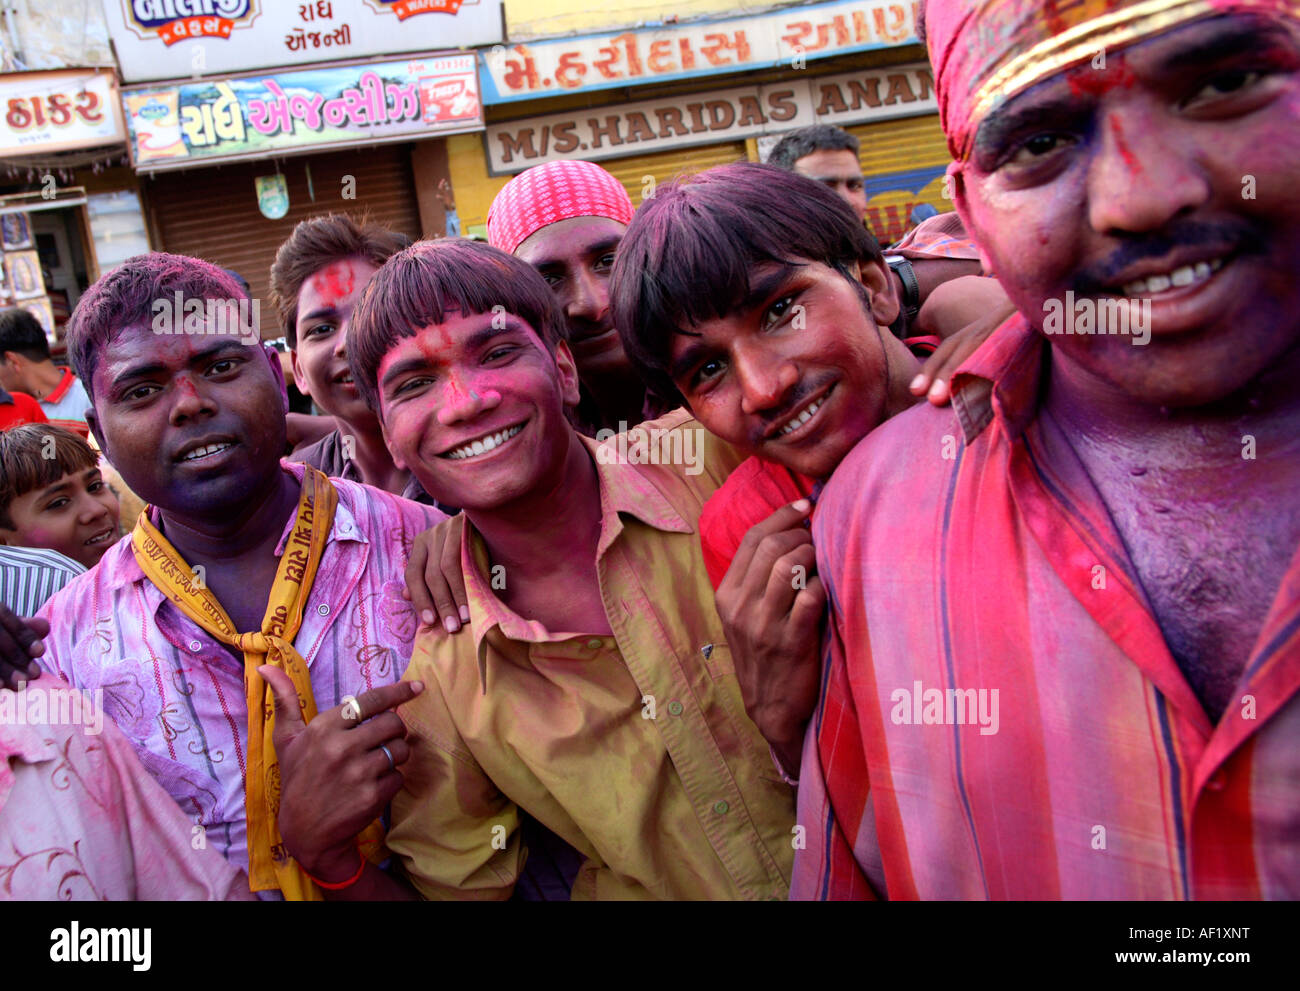 Indian males covered in pink paint celebrating holi spring festival of colours, Dwarka, Gujarat, India Stock Photo